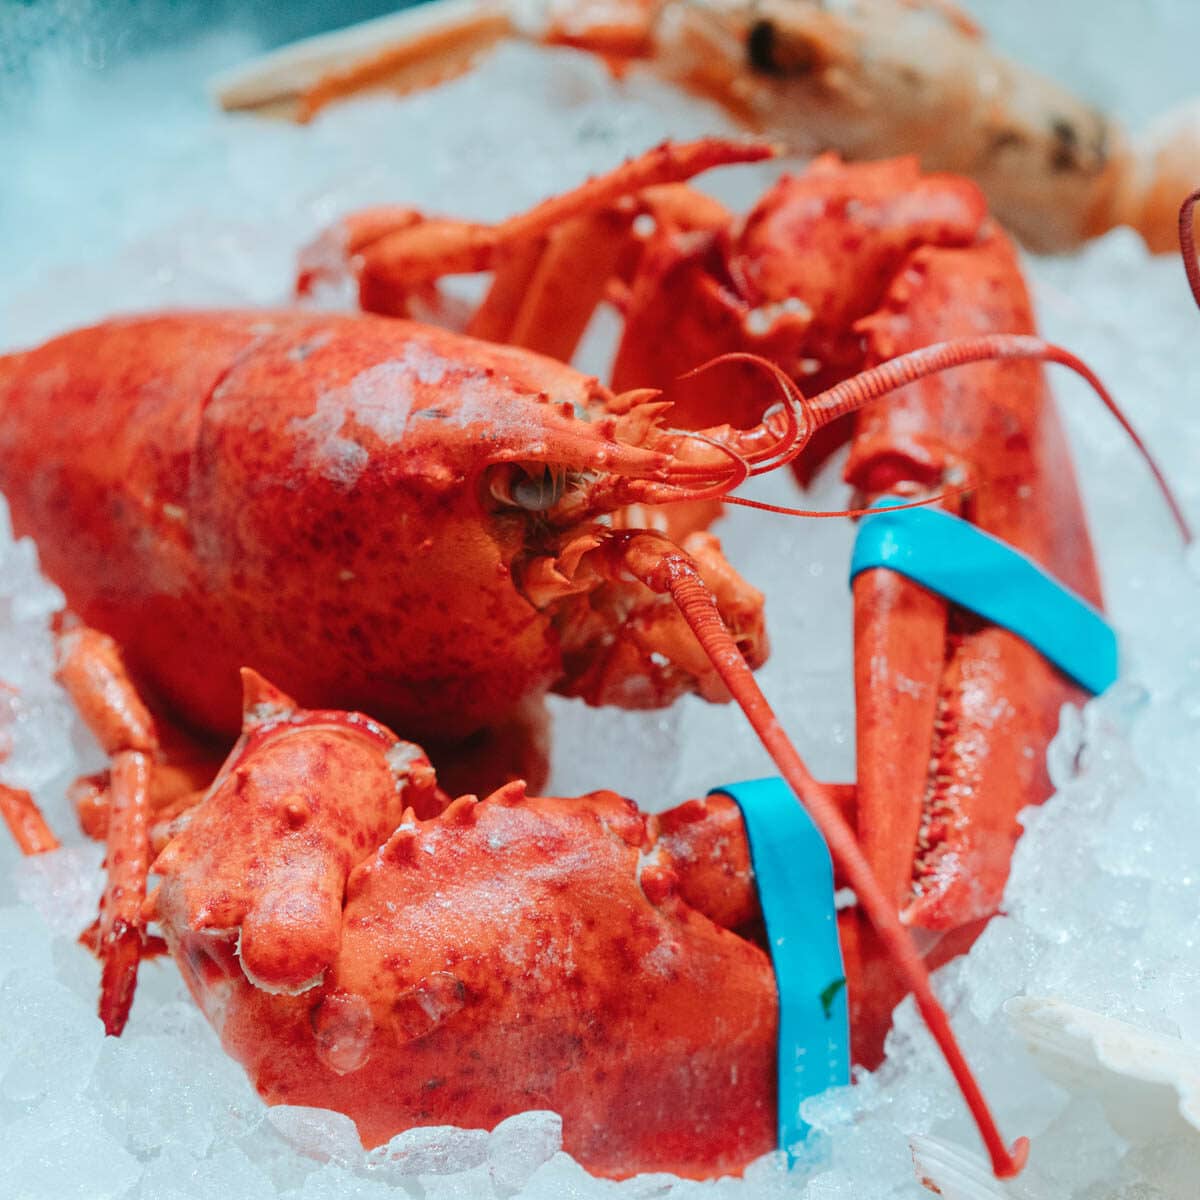 A whole cooked lobster laying in a pile of crushed ice.